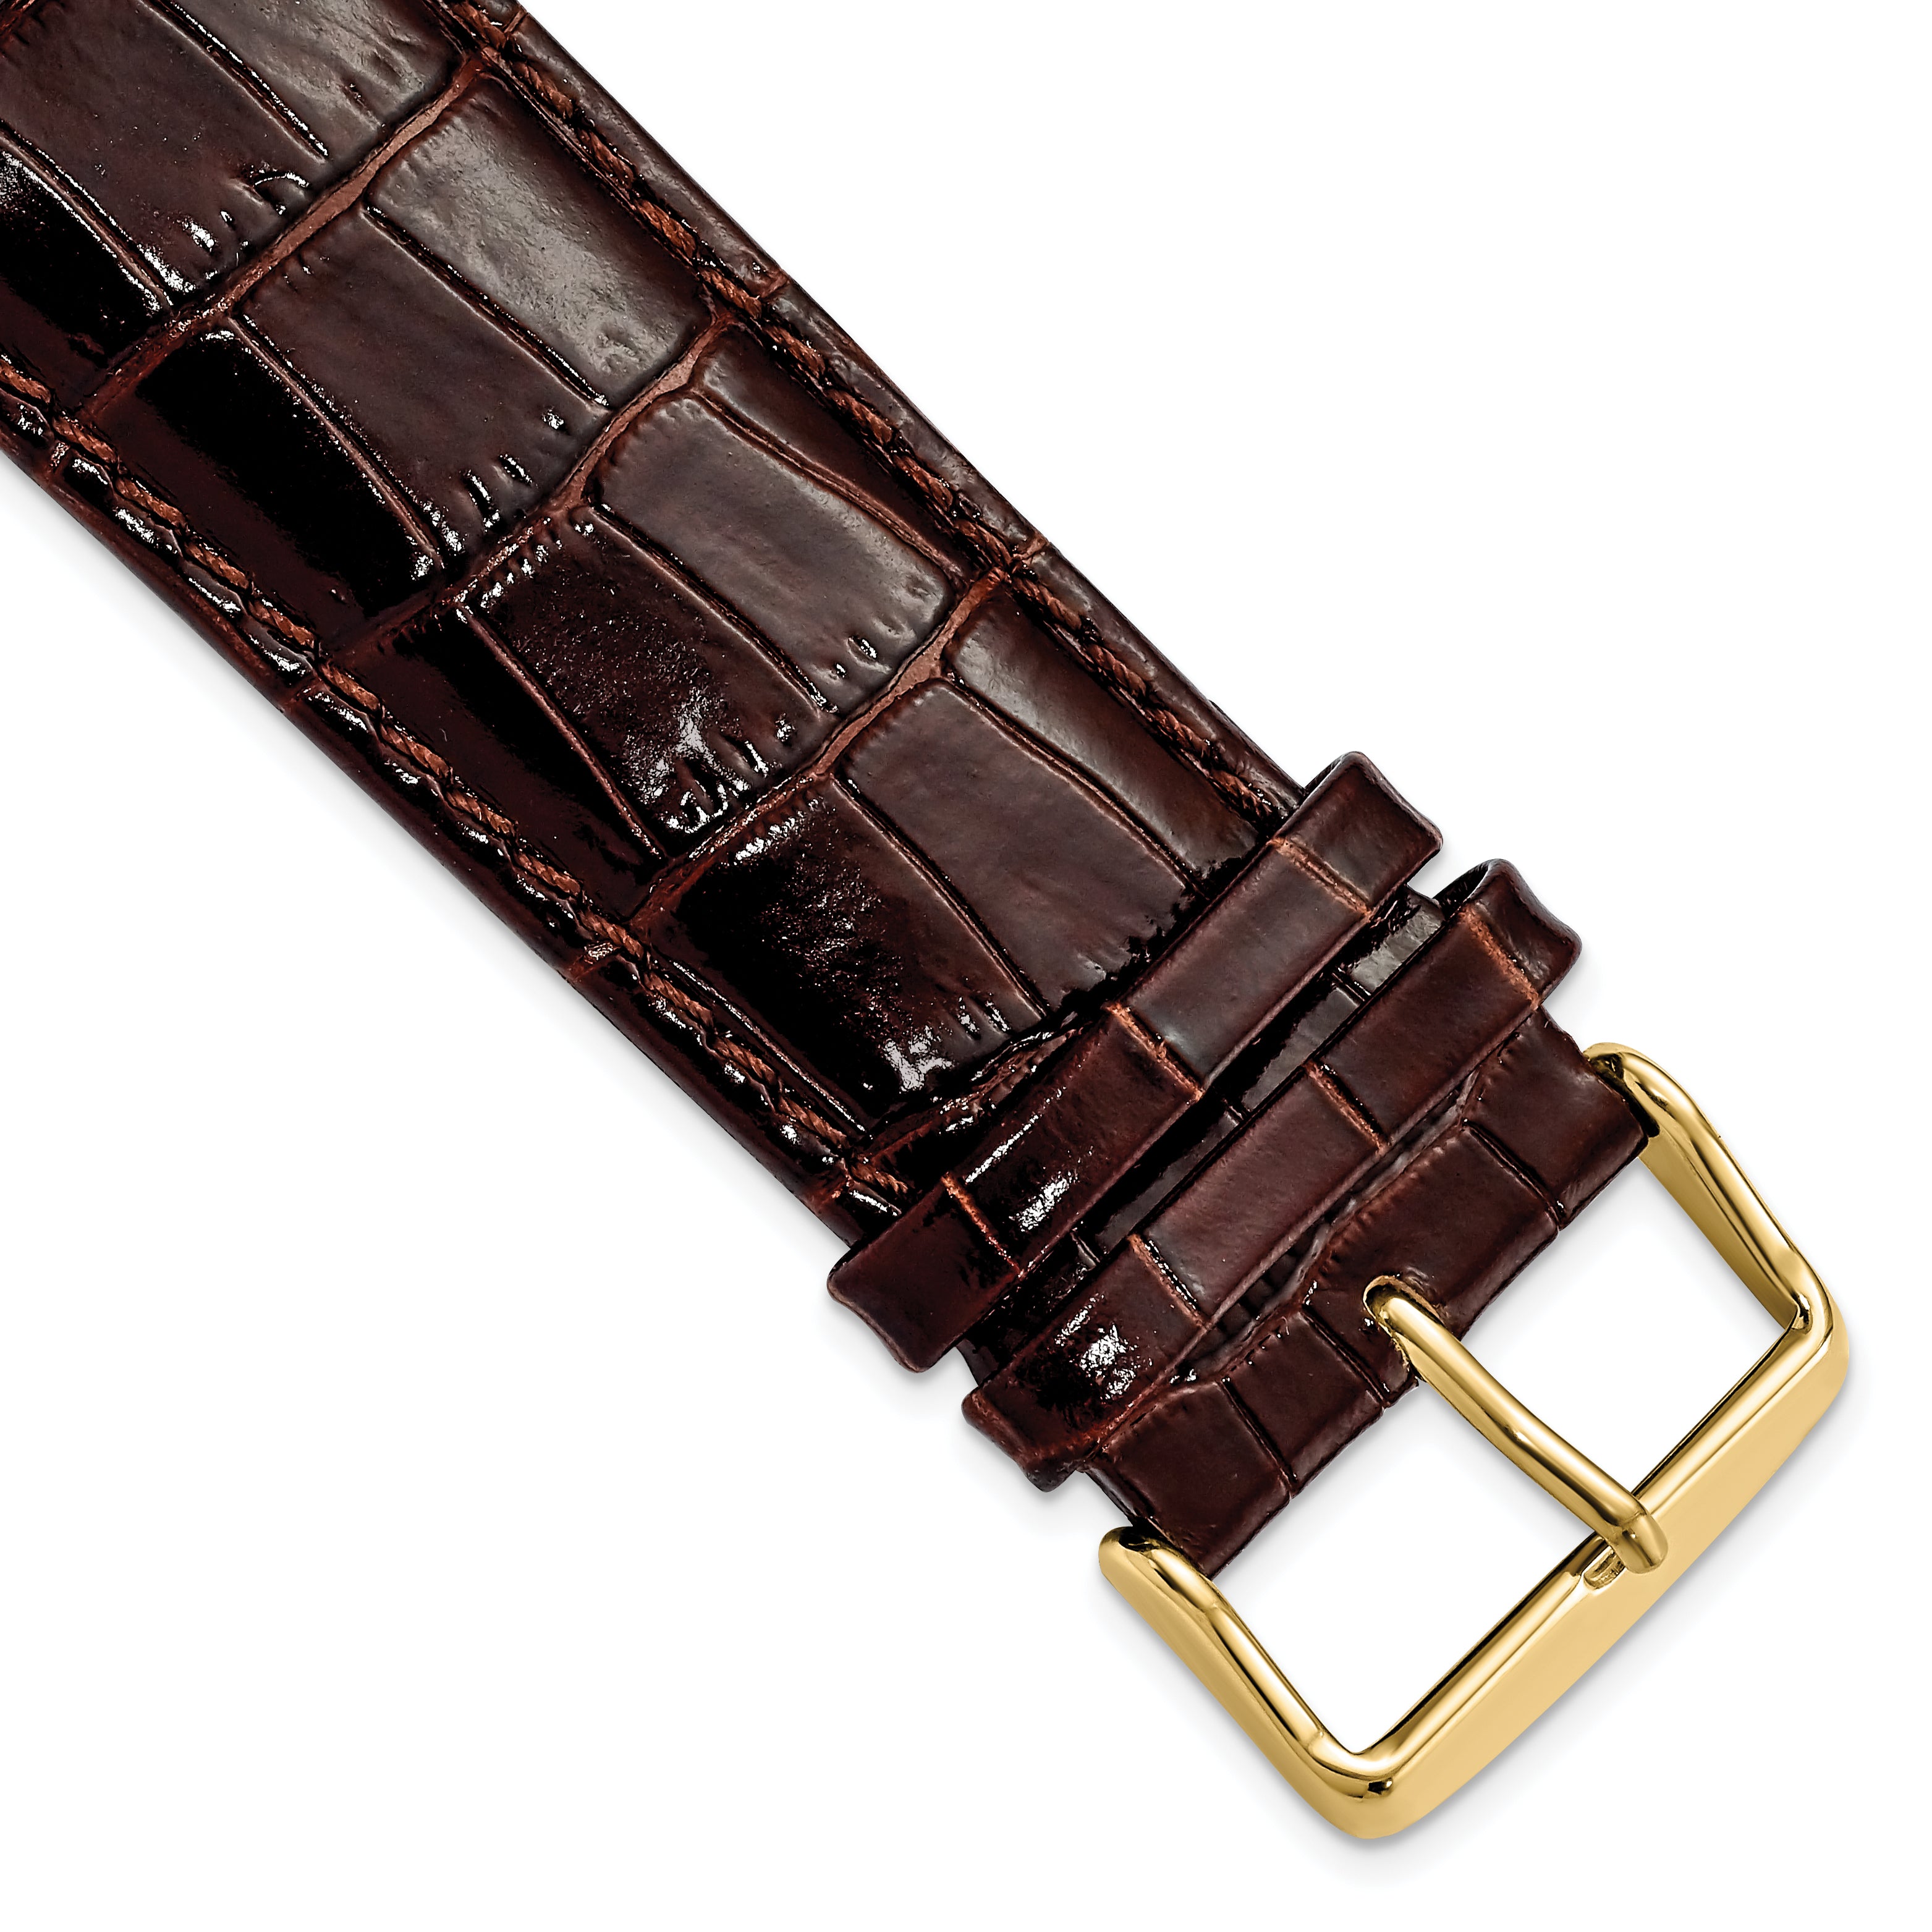 DeBeer 26mm Dark Brown Crocodile Grain Chronograph Leather with Gold-tone Buckle 7.5 inch Watch Band